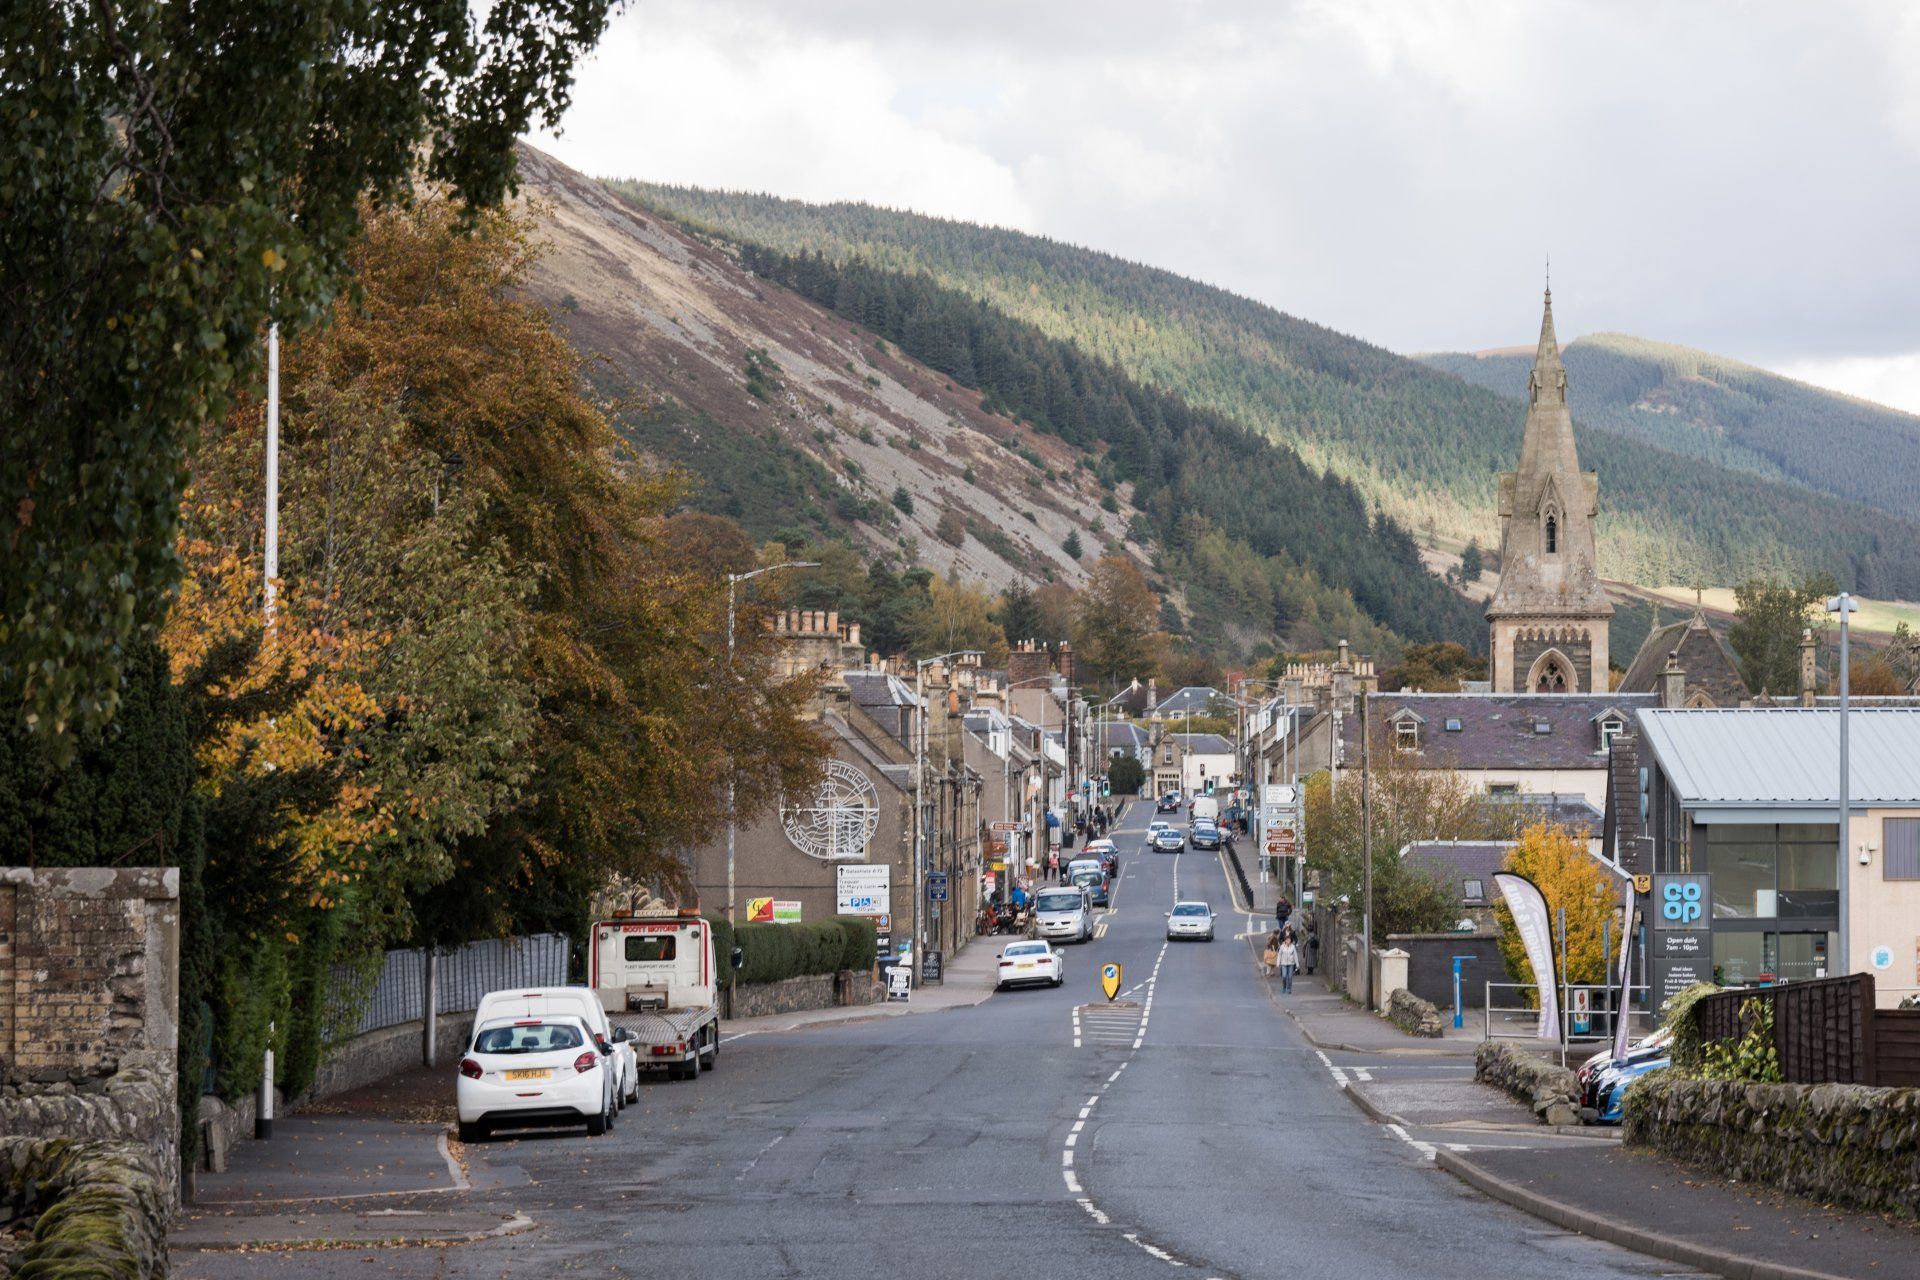 Innerleithen town centre and hills in distance